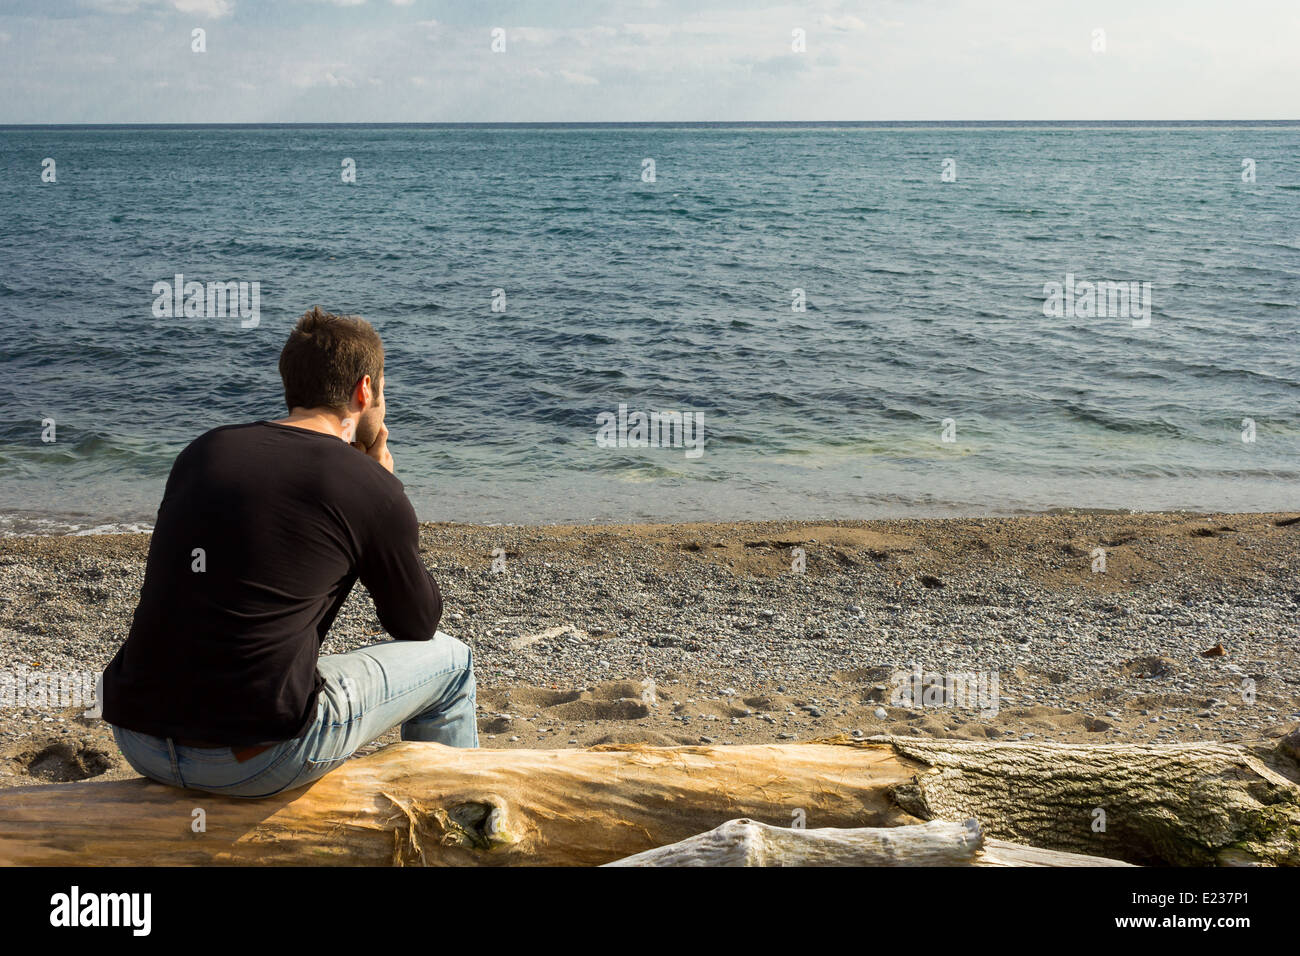 Man sitting on a log staring out to sea Stock Photo